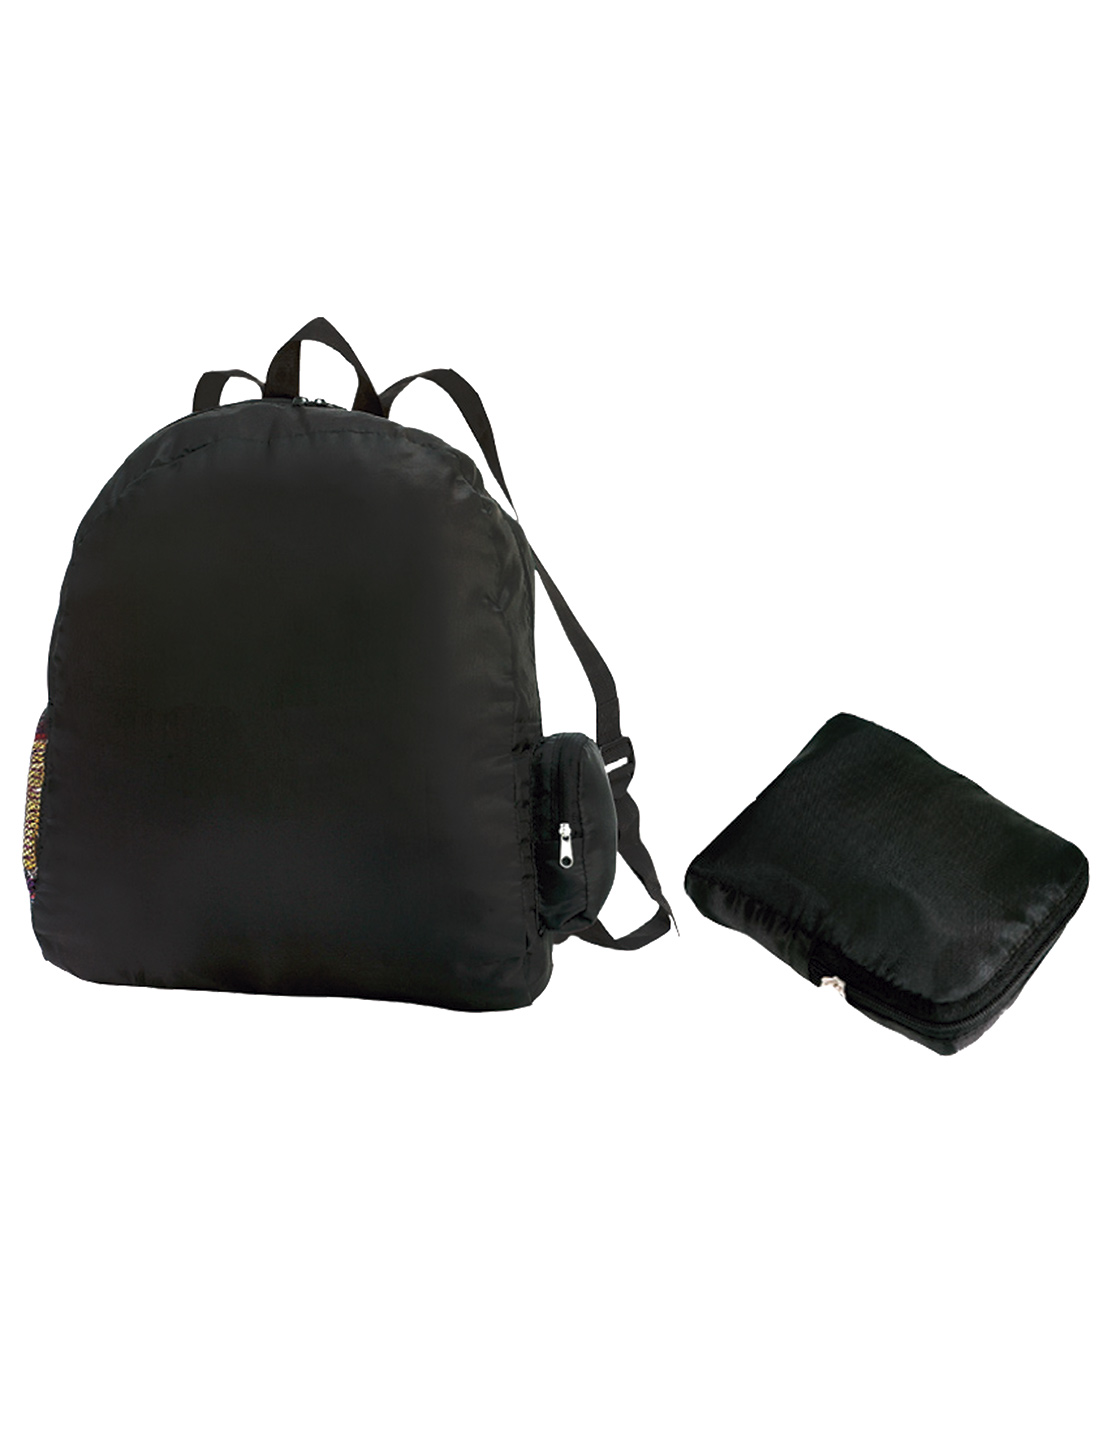 770028, Back pack 1 Compartimiento